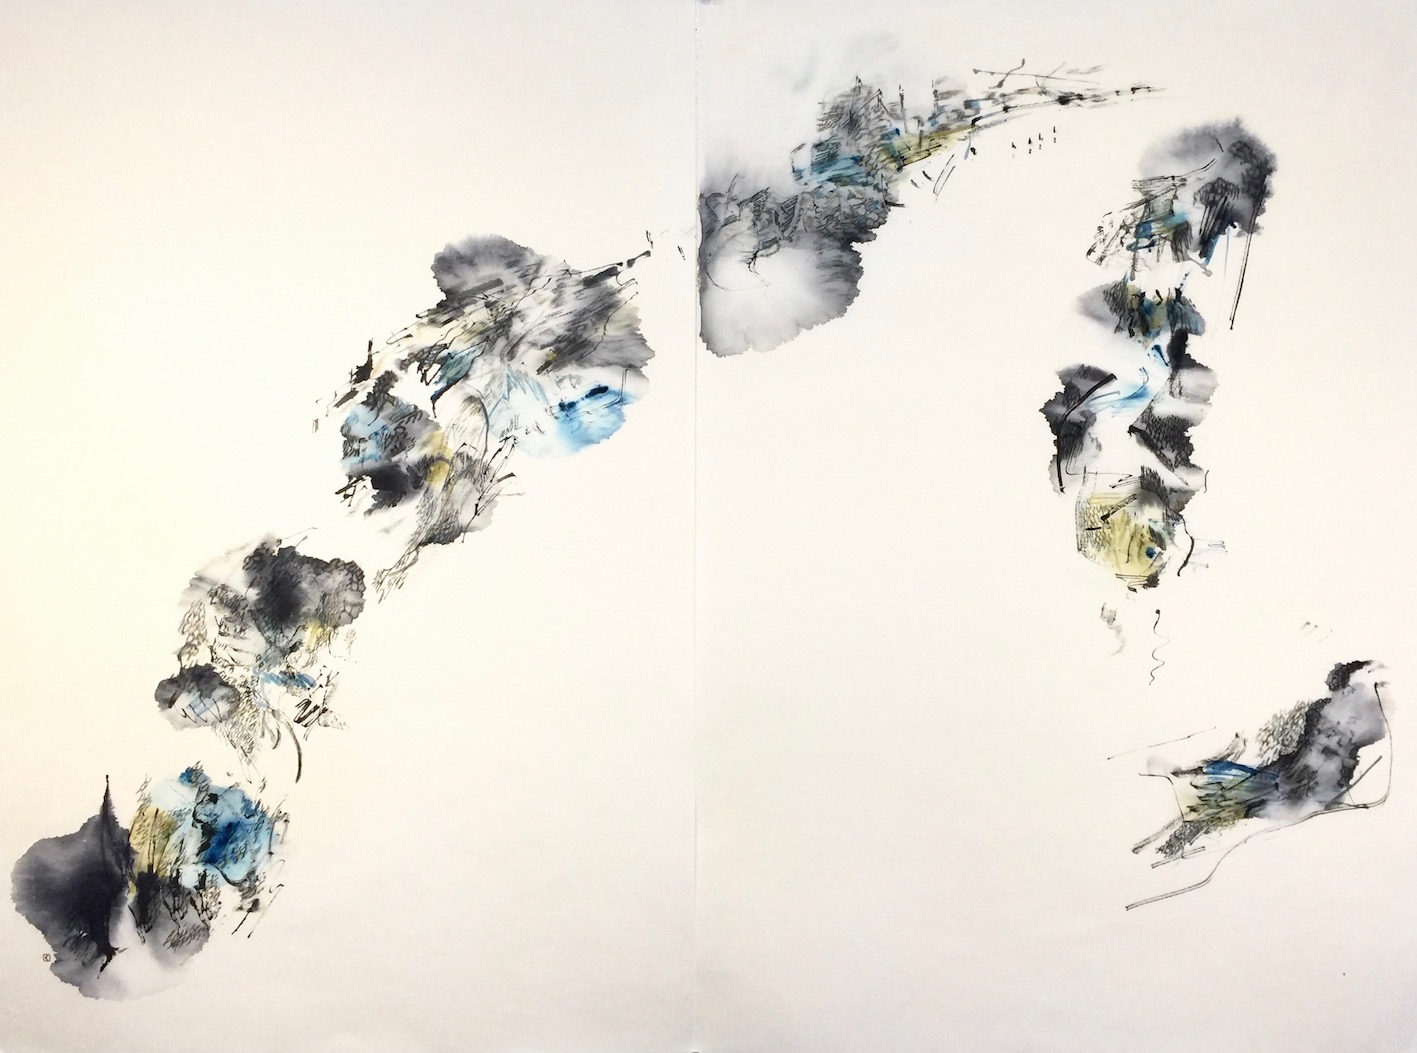 Lines open up 4 開く線 4 73 x 100 cm Sumi ink, water colour, acrylic 墨、水彩、アクリル 2021